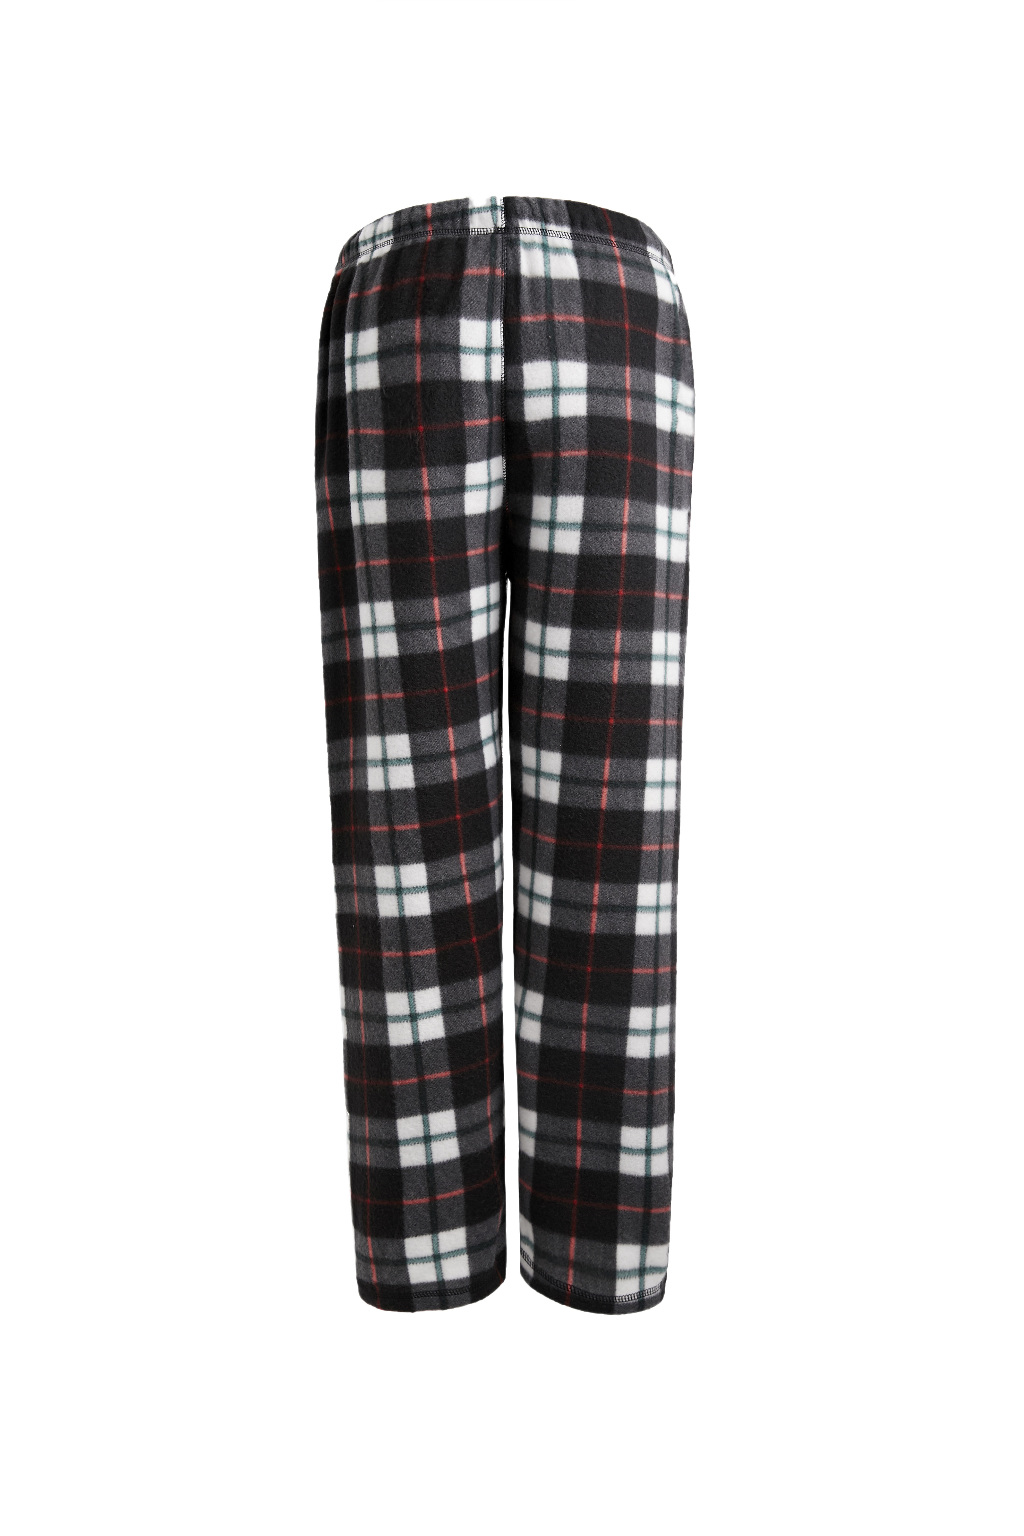 Red Black Plaid Pajama Pants Men Lounging Relaxed House Pjs Sleep Bottoms  Mens Flannel Cotton Drawstring Button Fly Slee size S Color 6